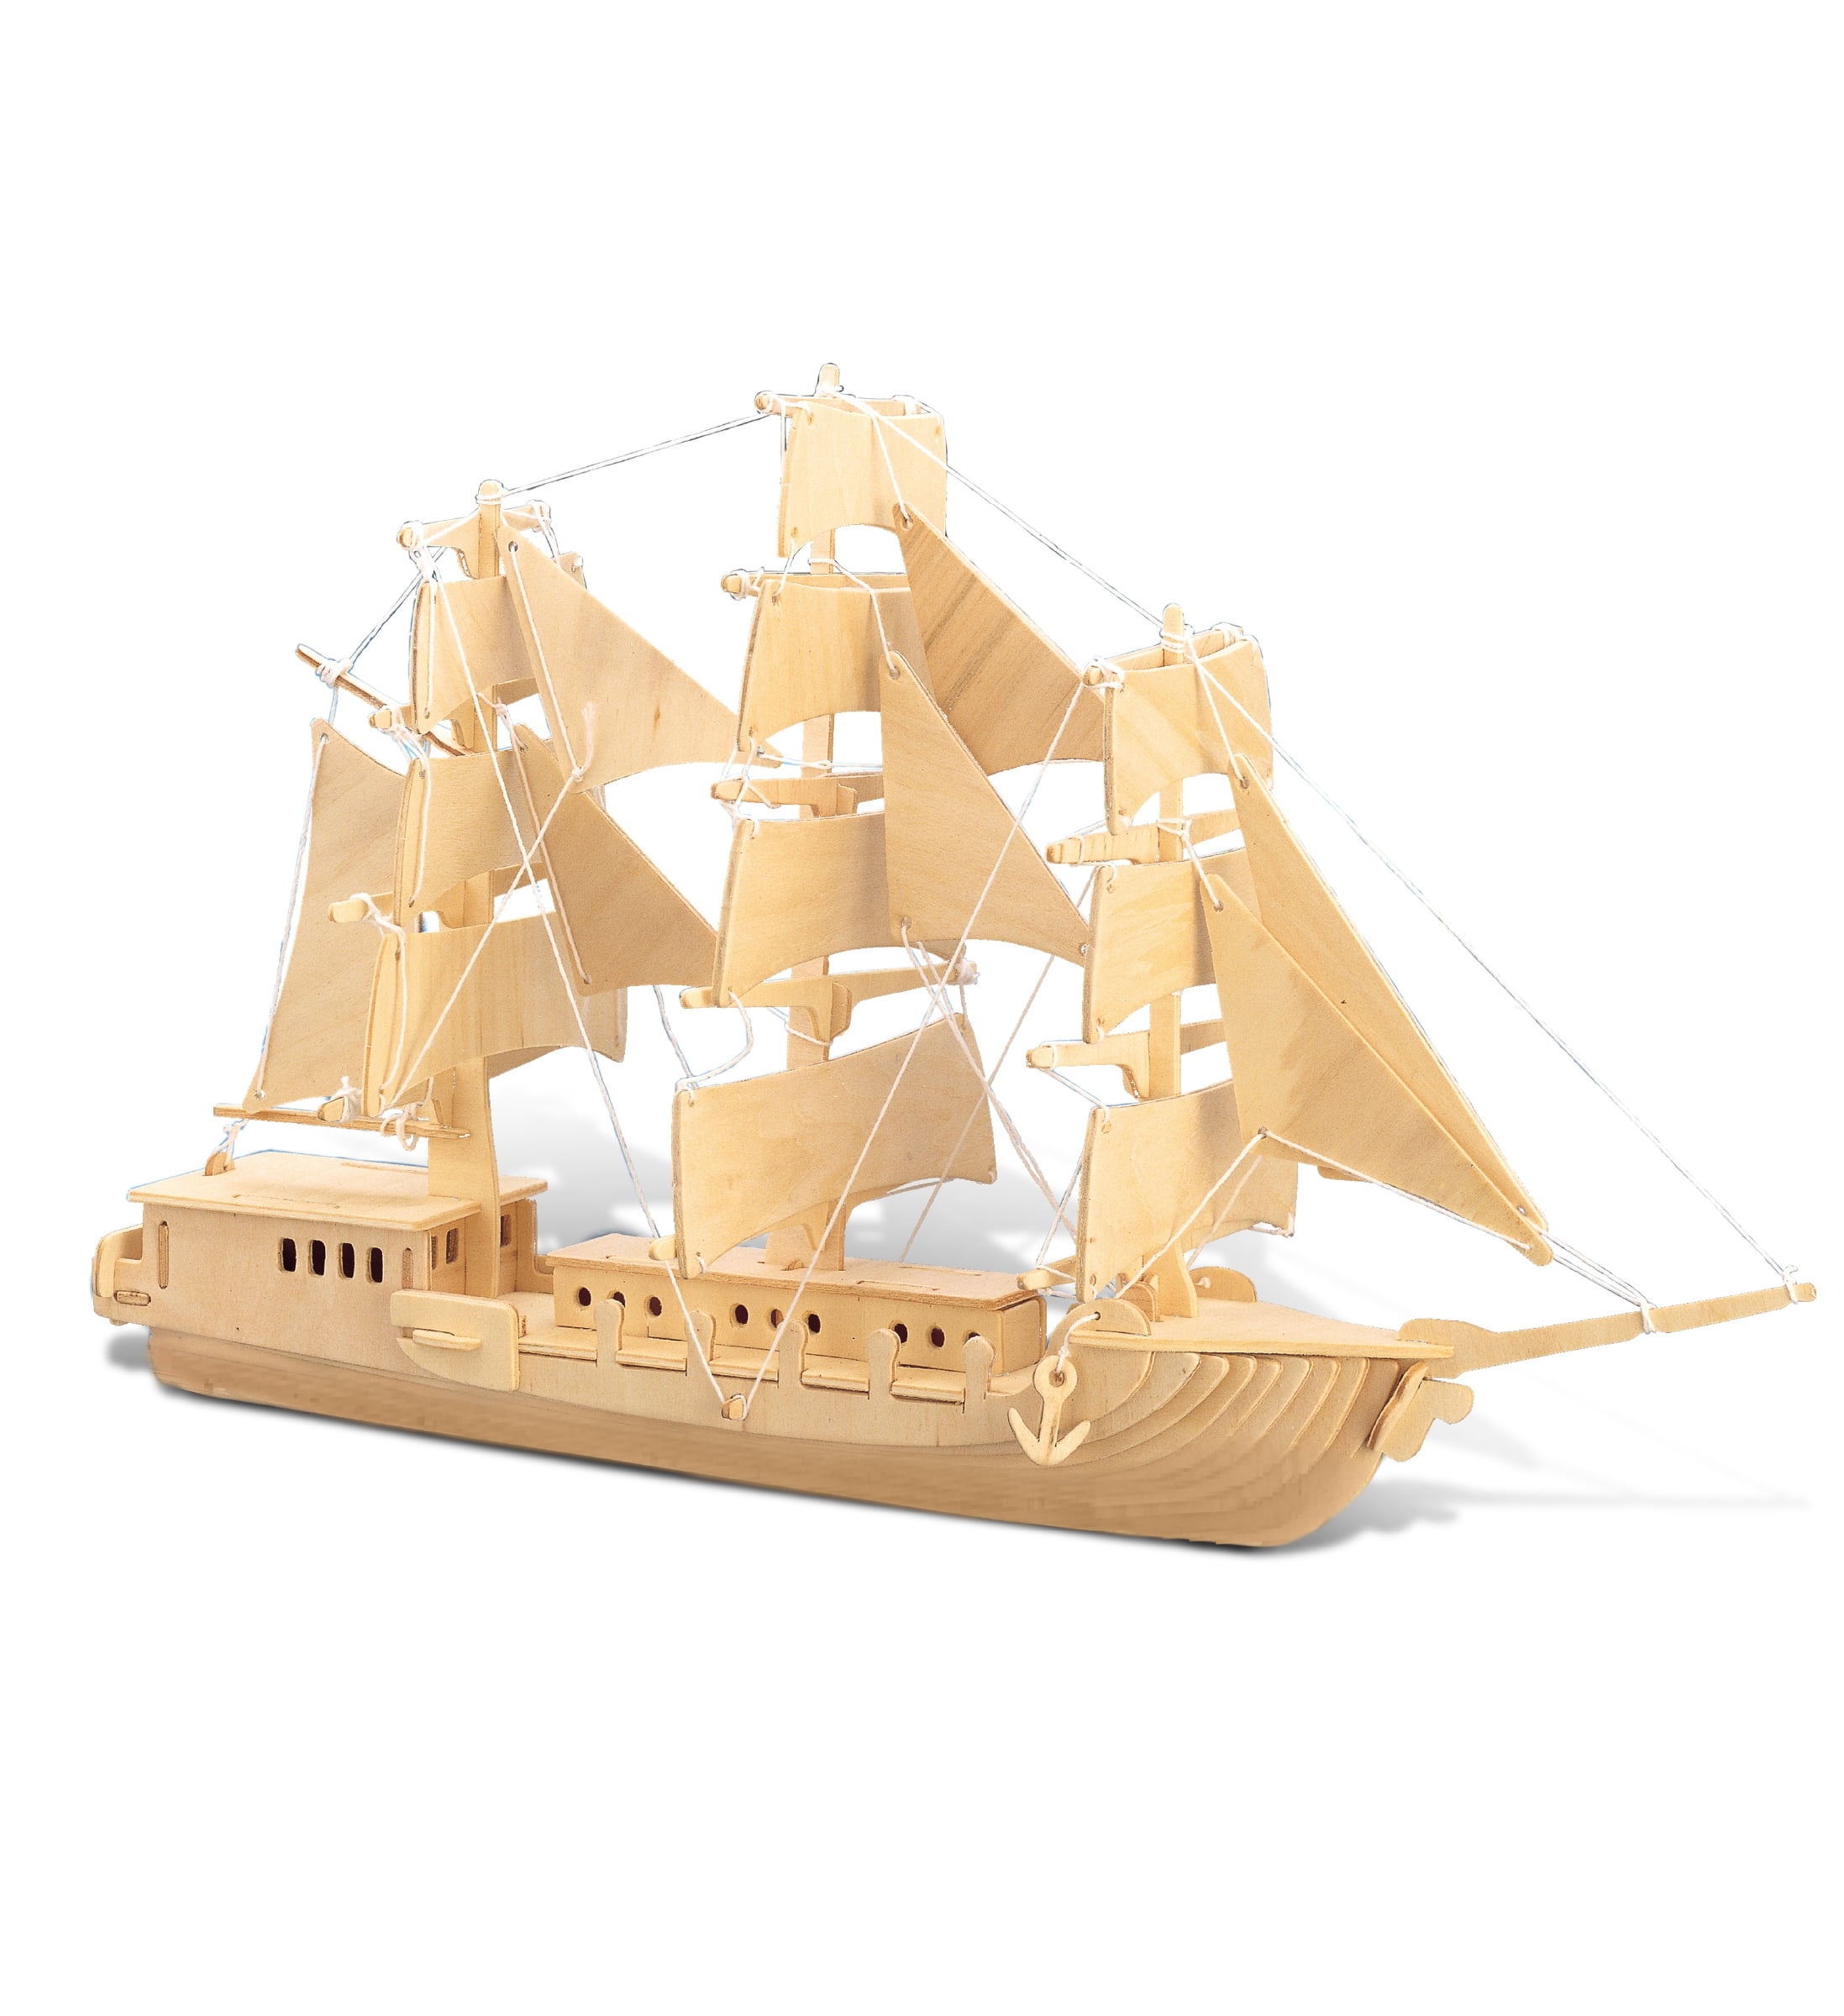 3D Wooden Jigsaw Puzzle Sailboat Model Woodcraft Kids Game Kit DIY Toy H